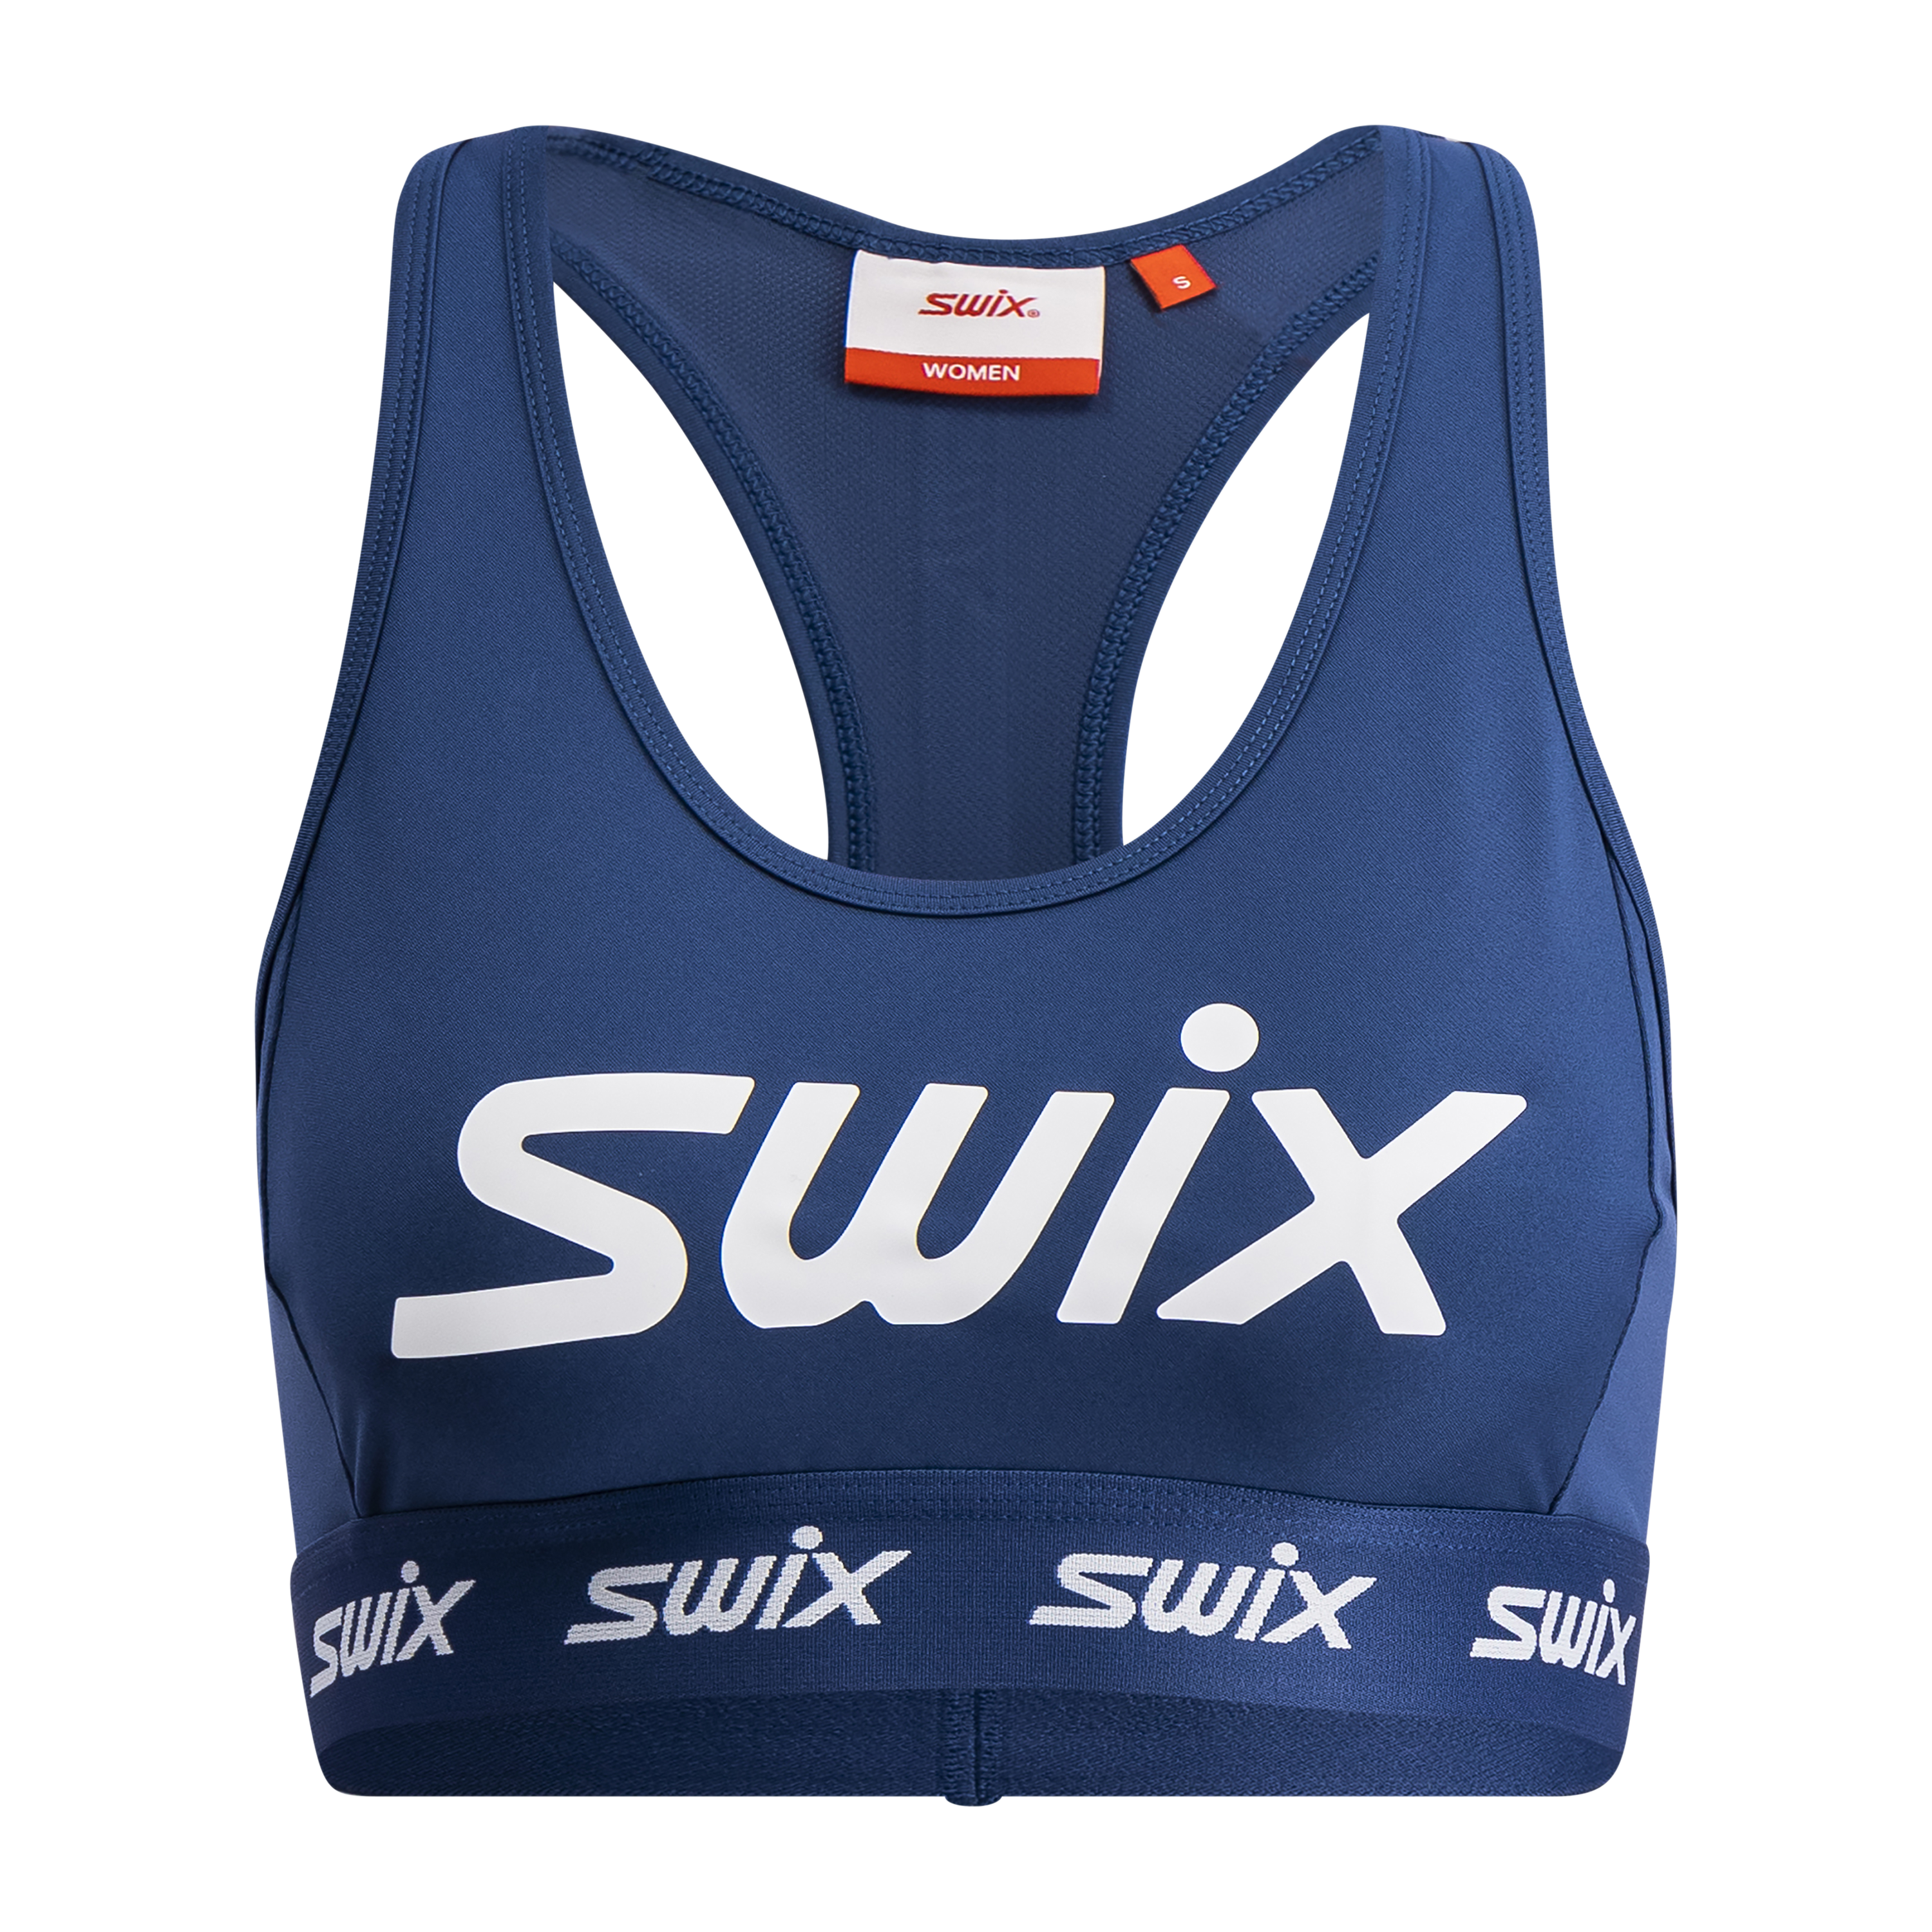 Swix Premium sport products for cross country skiing